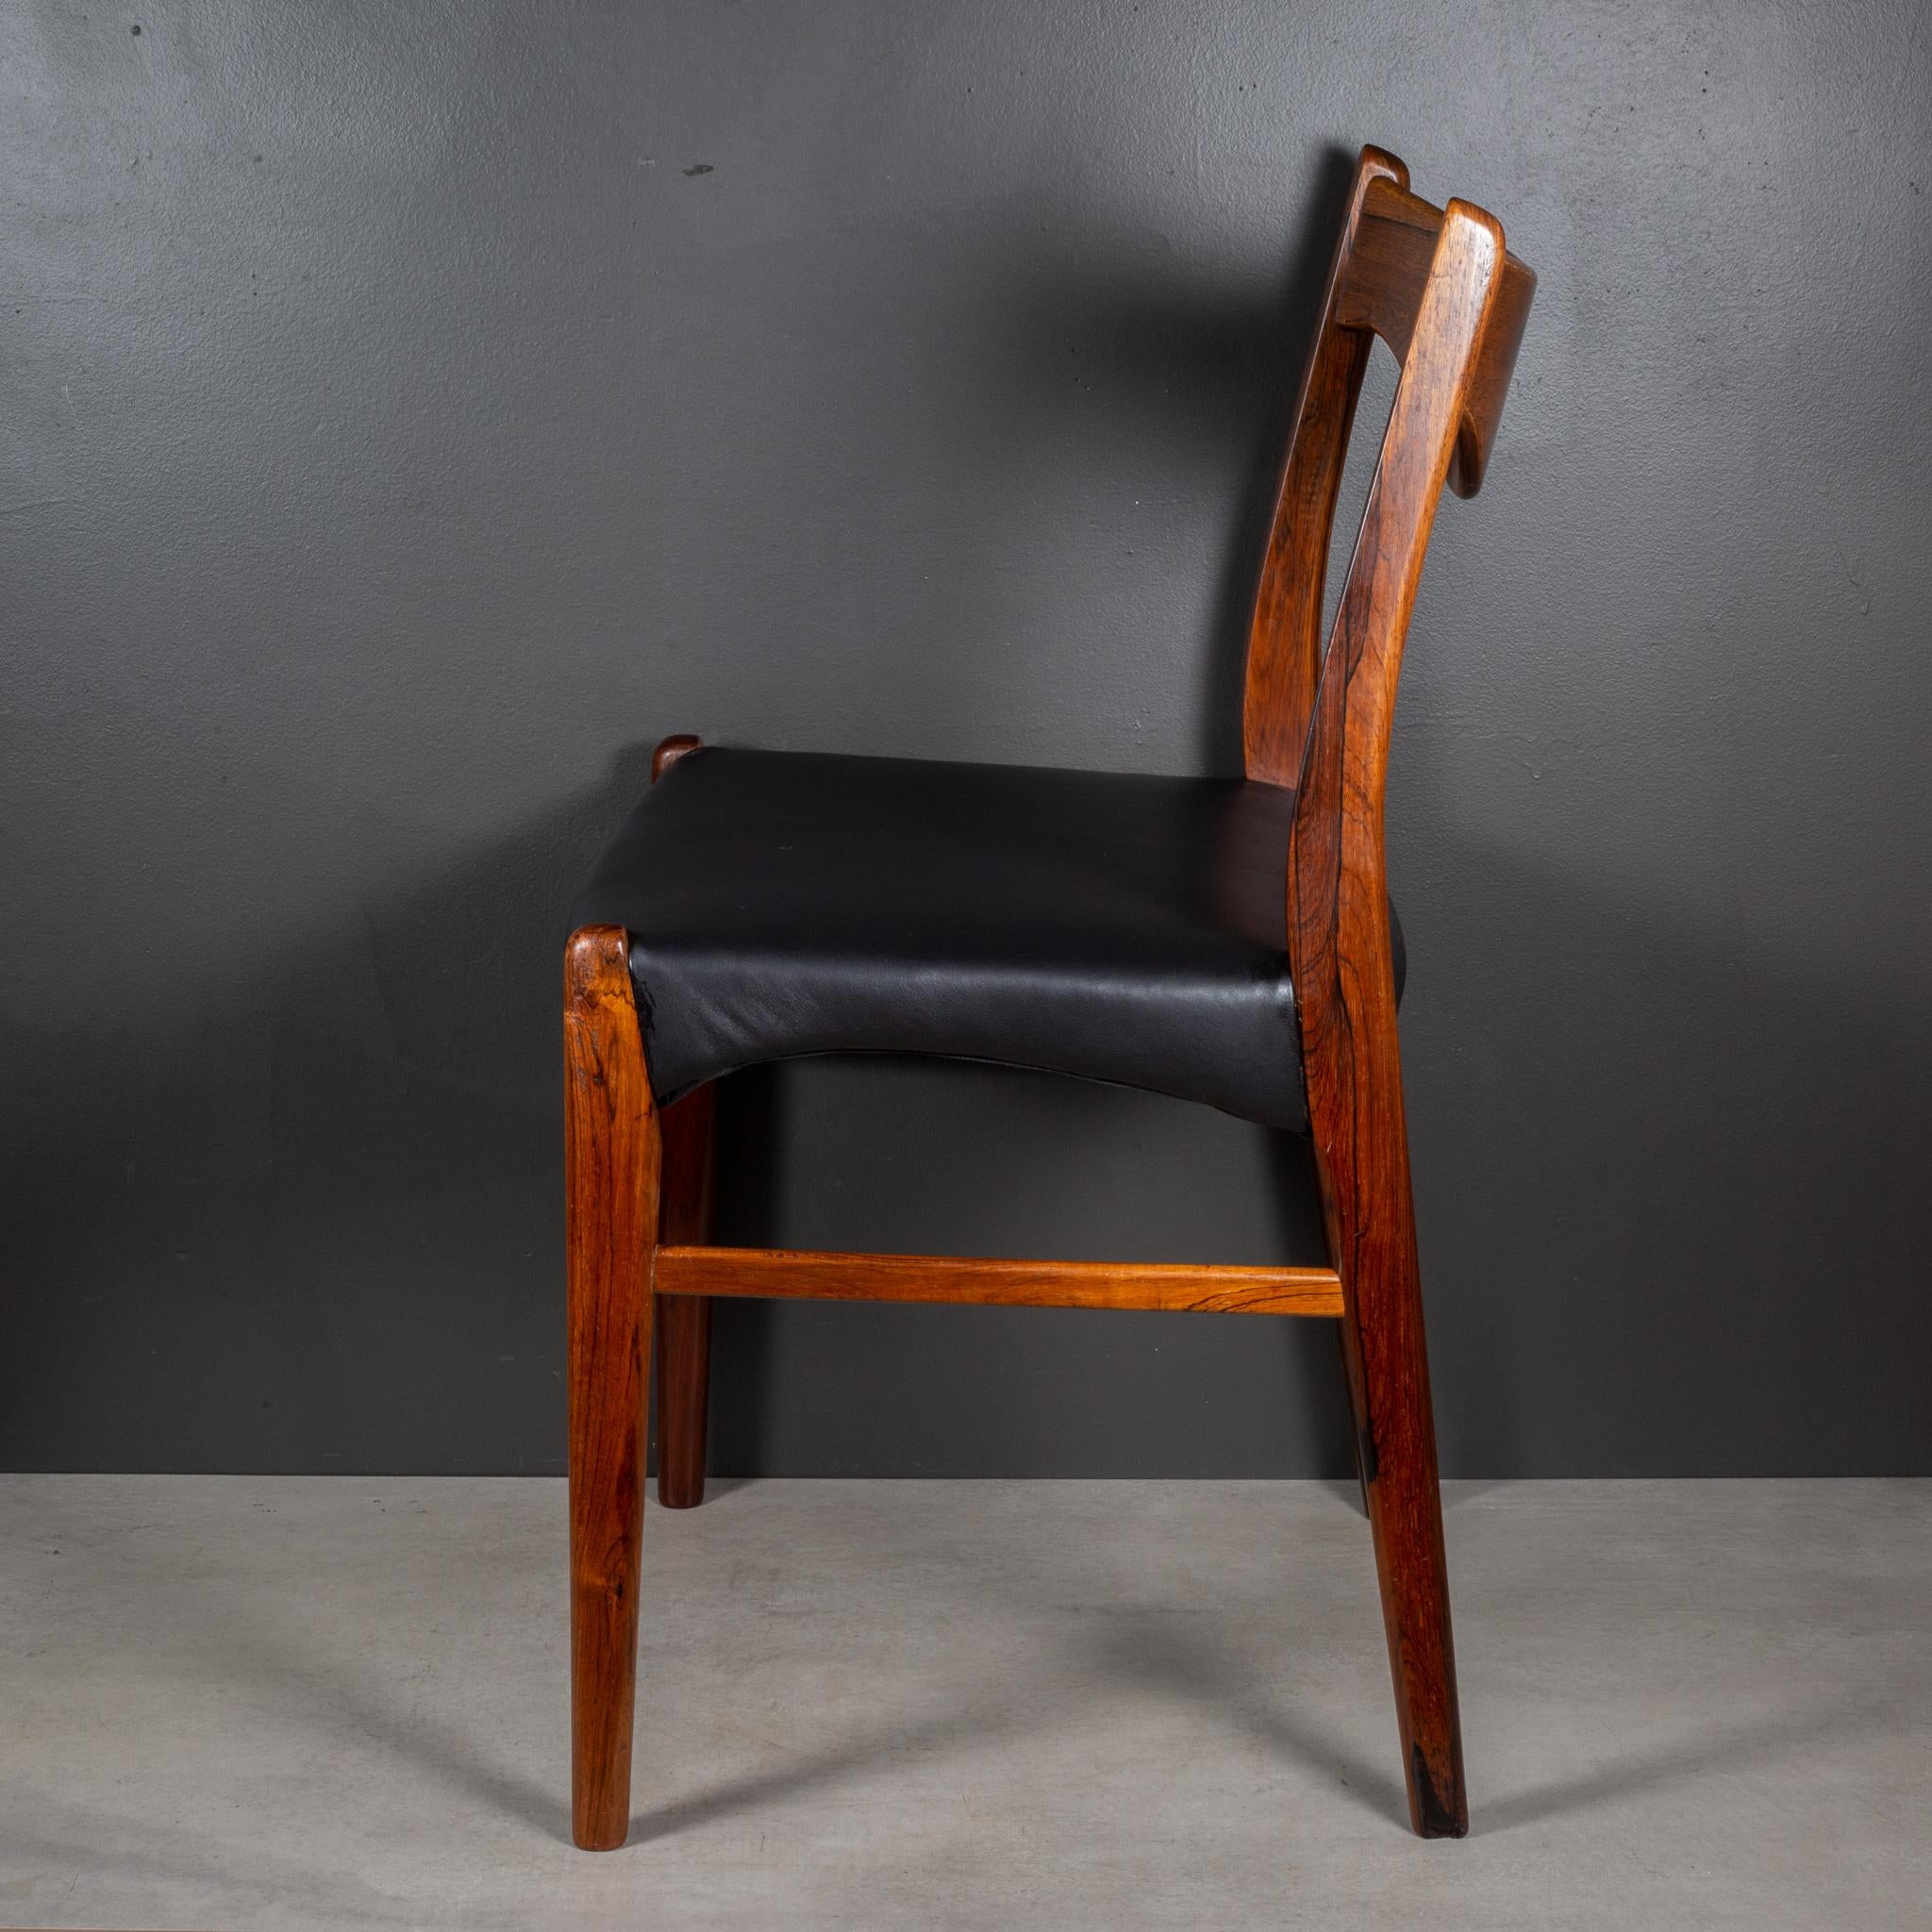 Arne Wahl Iversen Model GS61 Rosewood and Leather Dining Chairs c.1950 For Sale 10